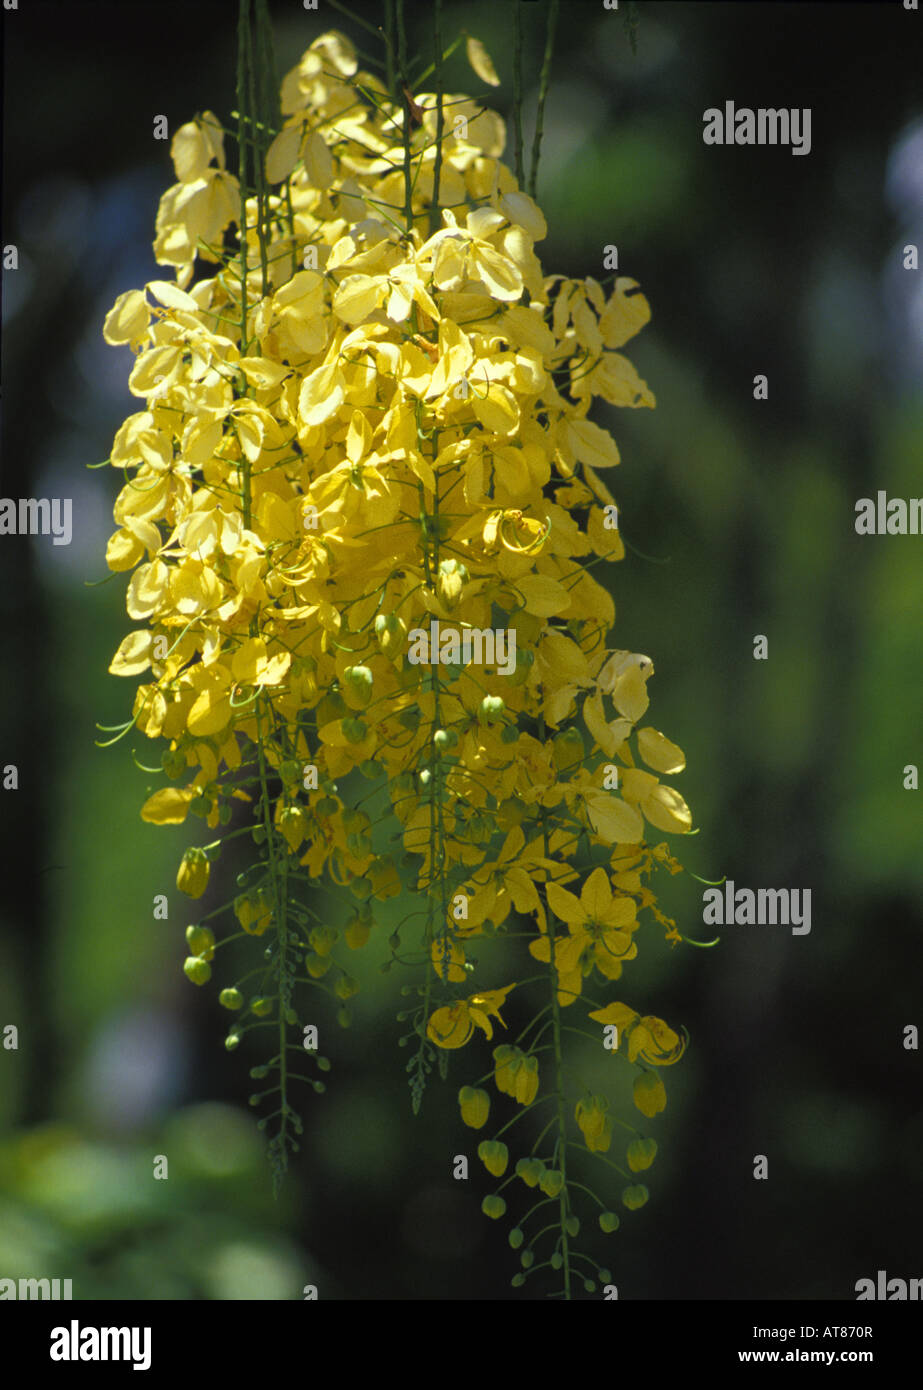 the Kassod tree (cassia siamea) flowers between July and October Stock Photo